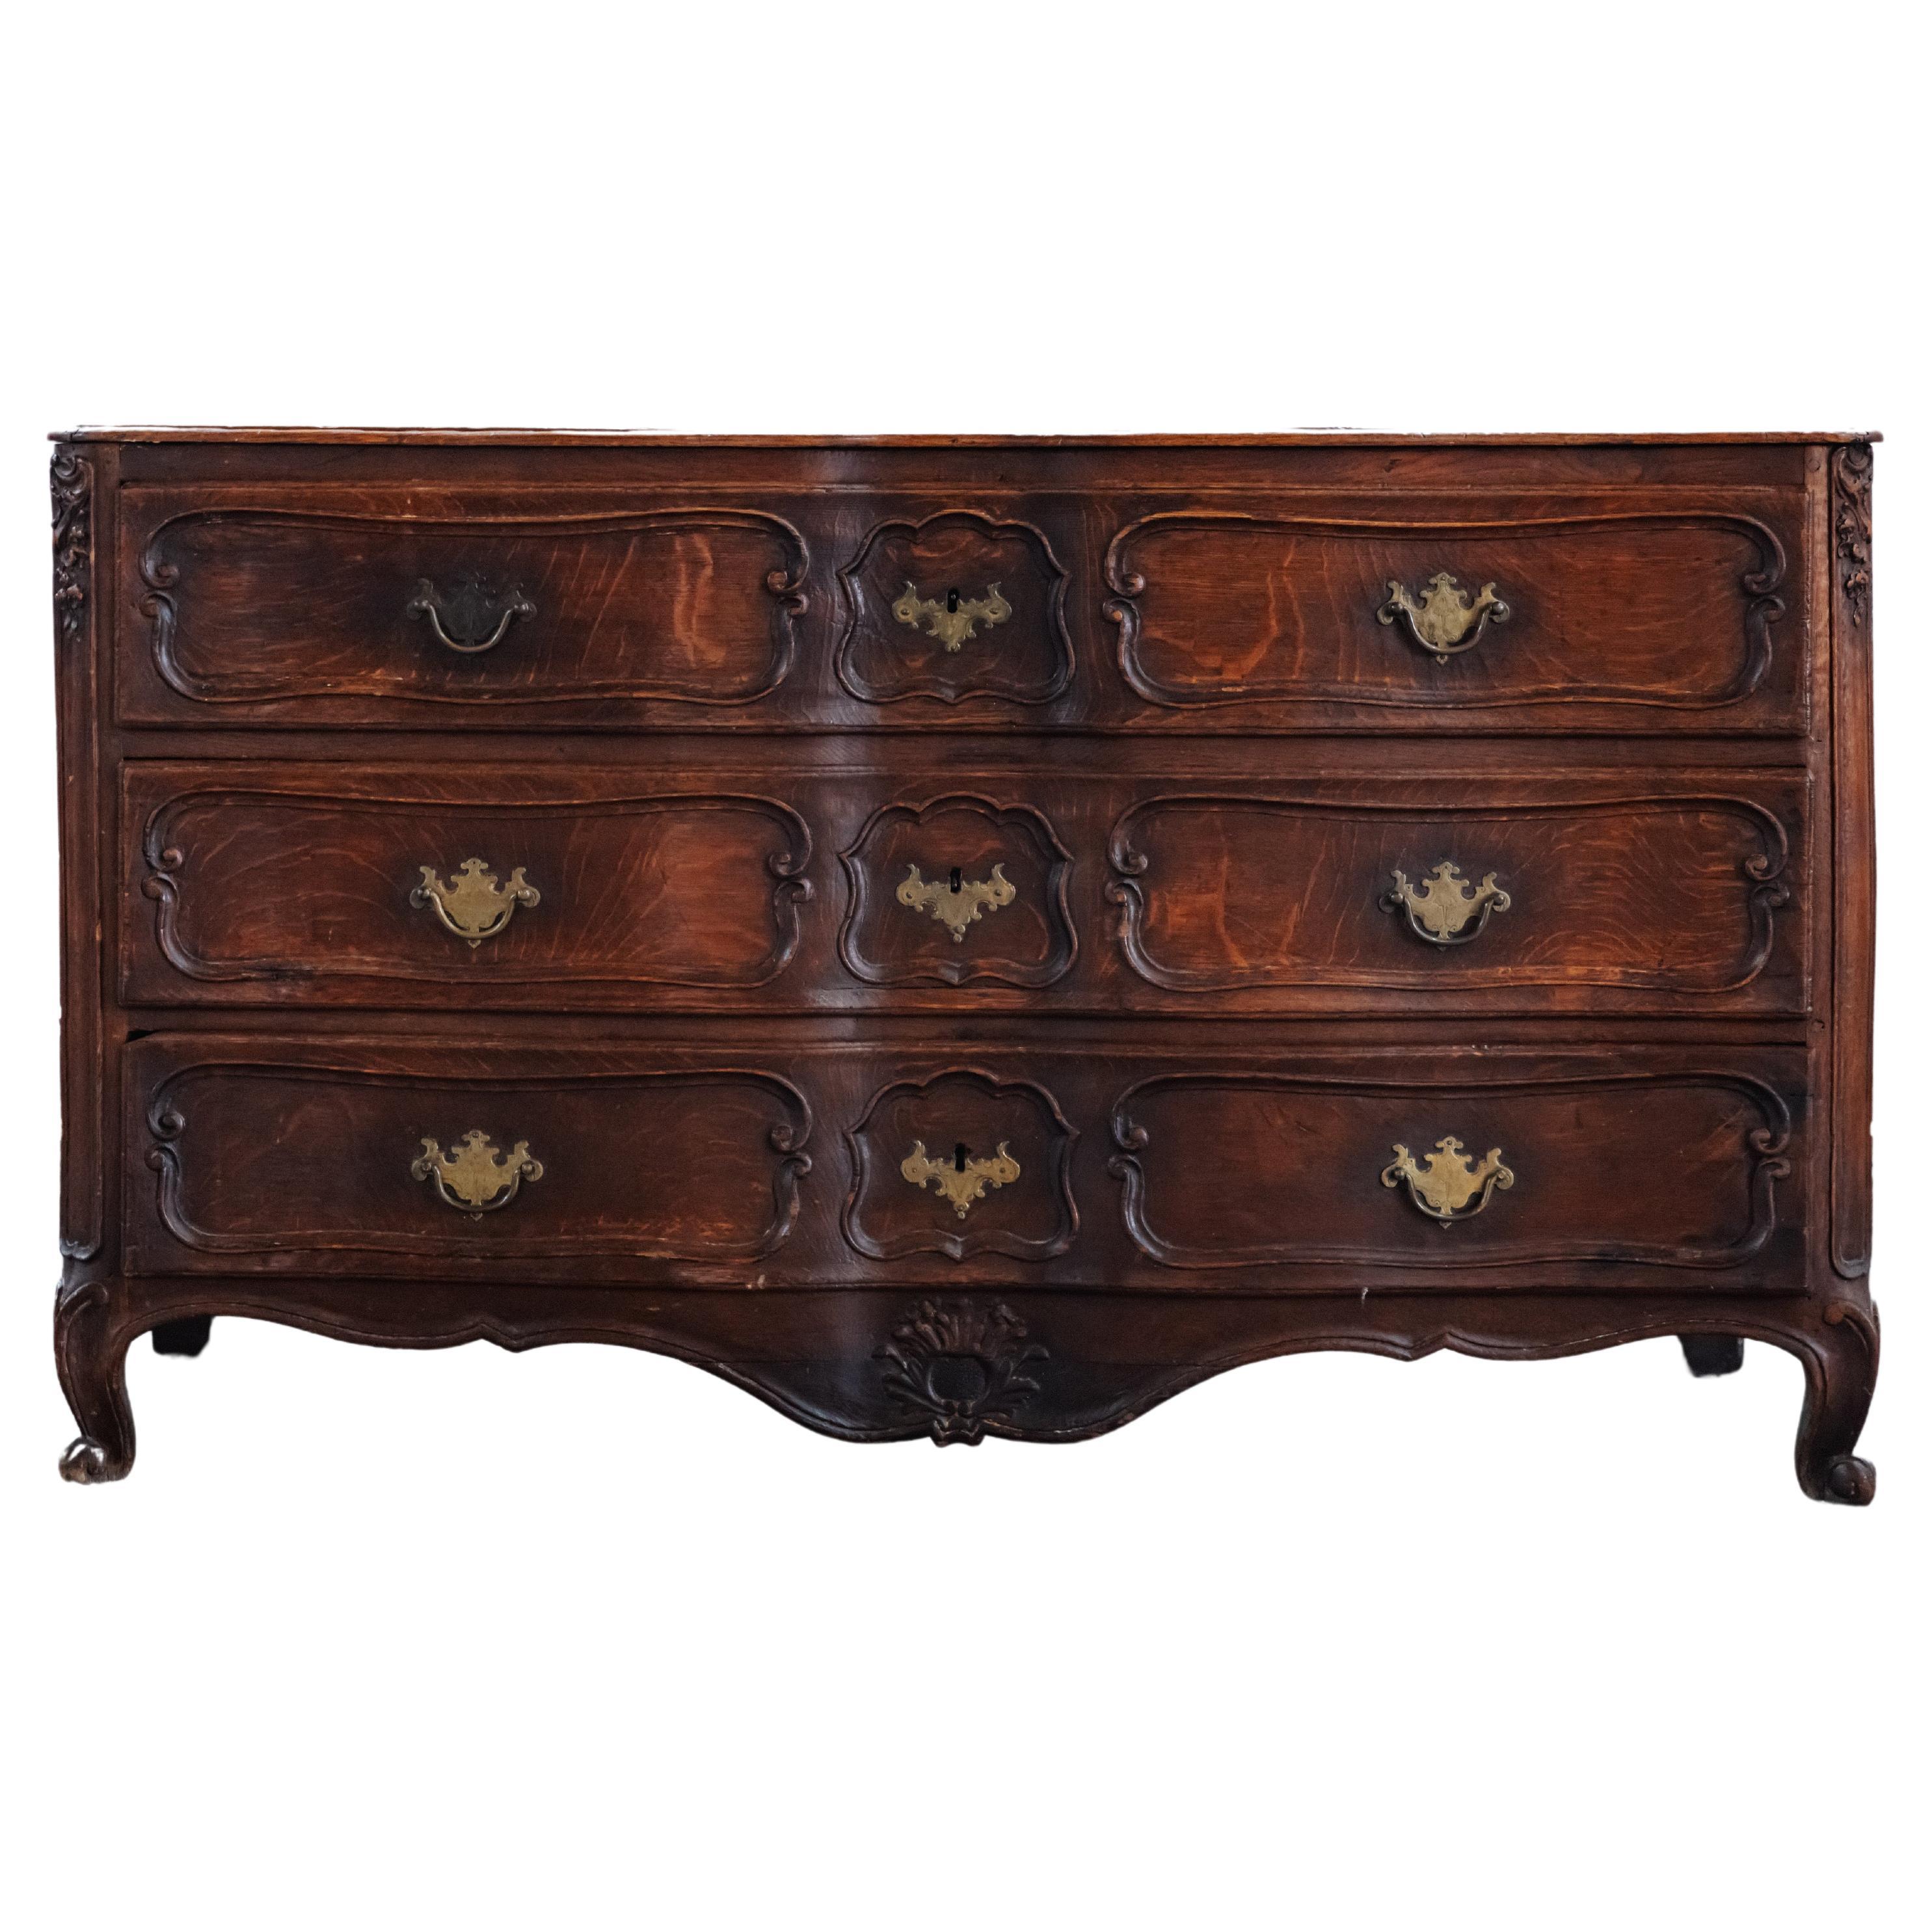 Early Oak Chest Of Drawers Form France, Circa 1800 For Sale